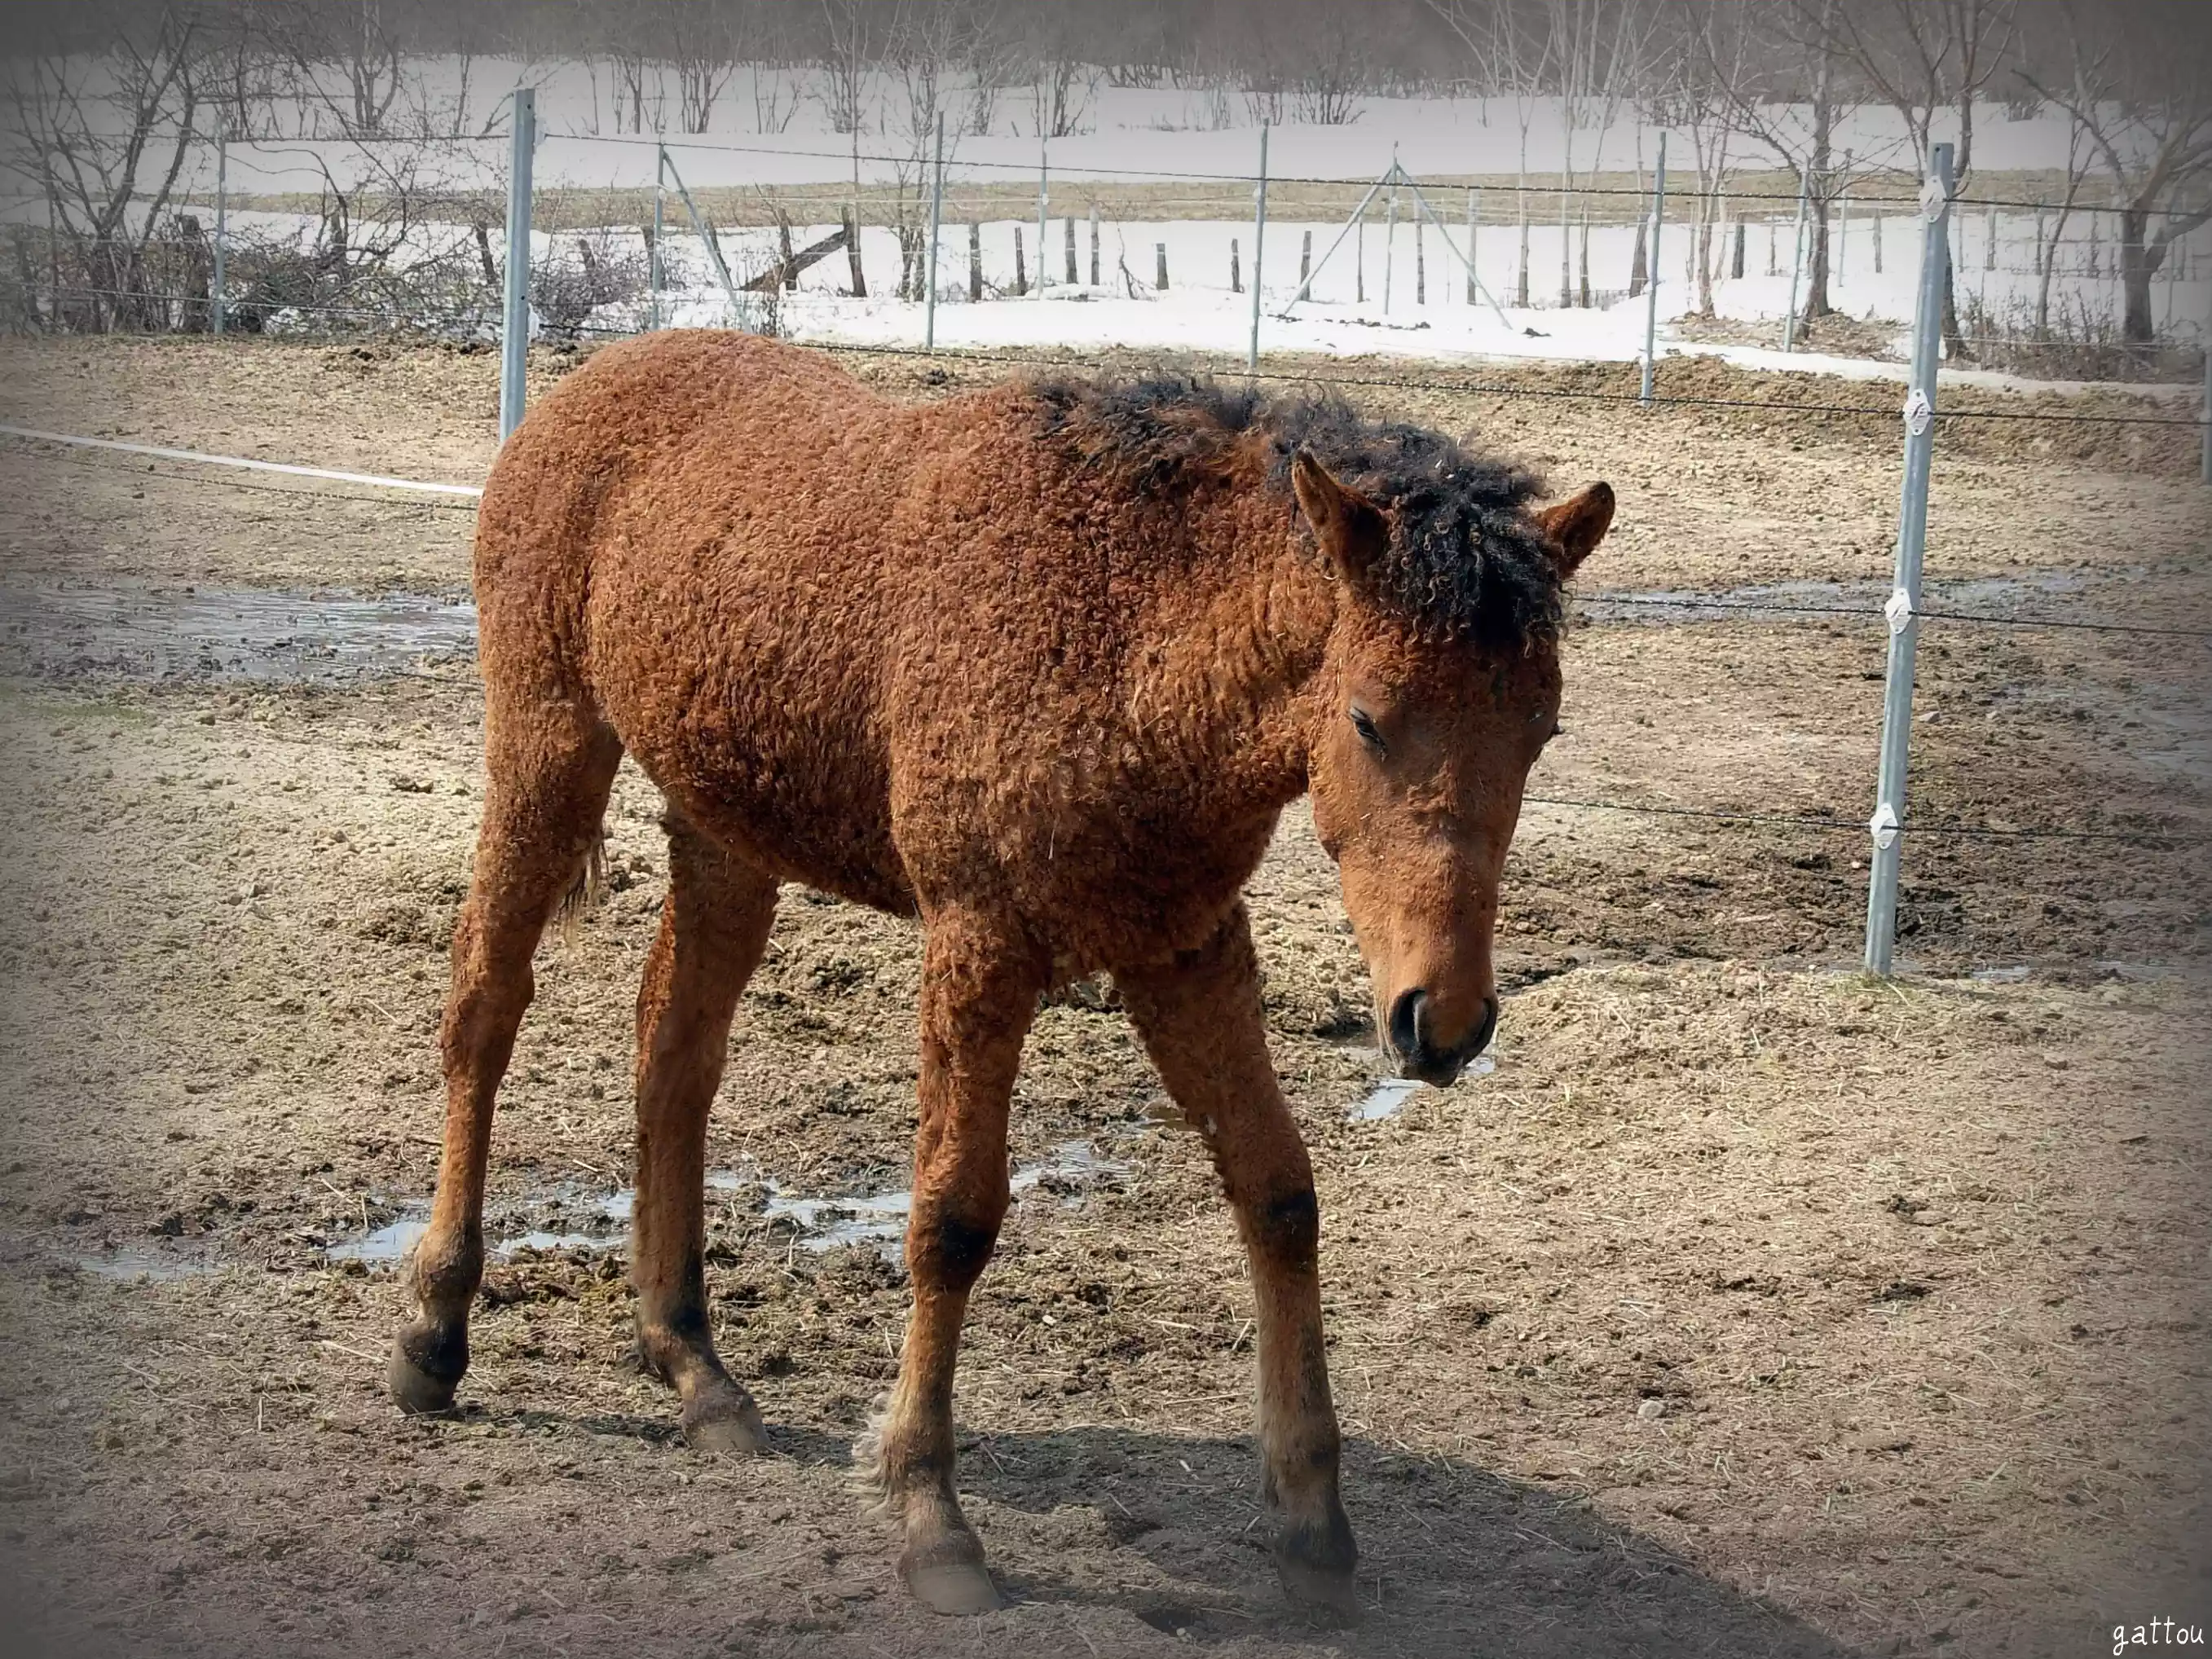 A brown curly horse walking on dirt